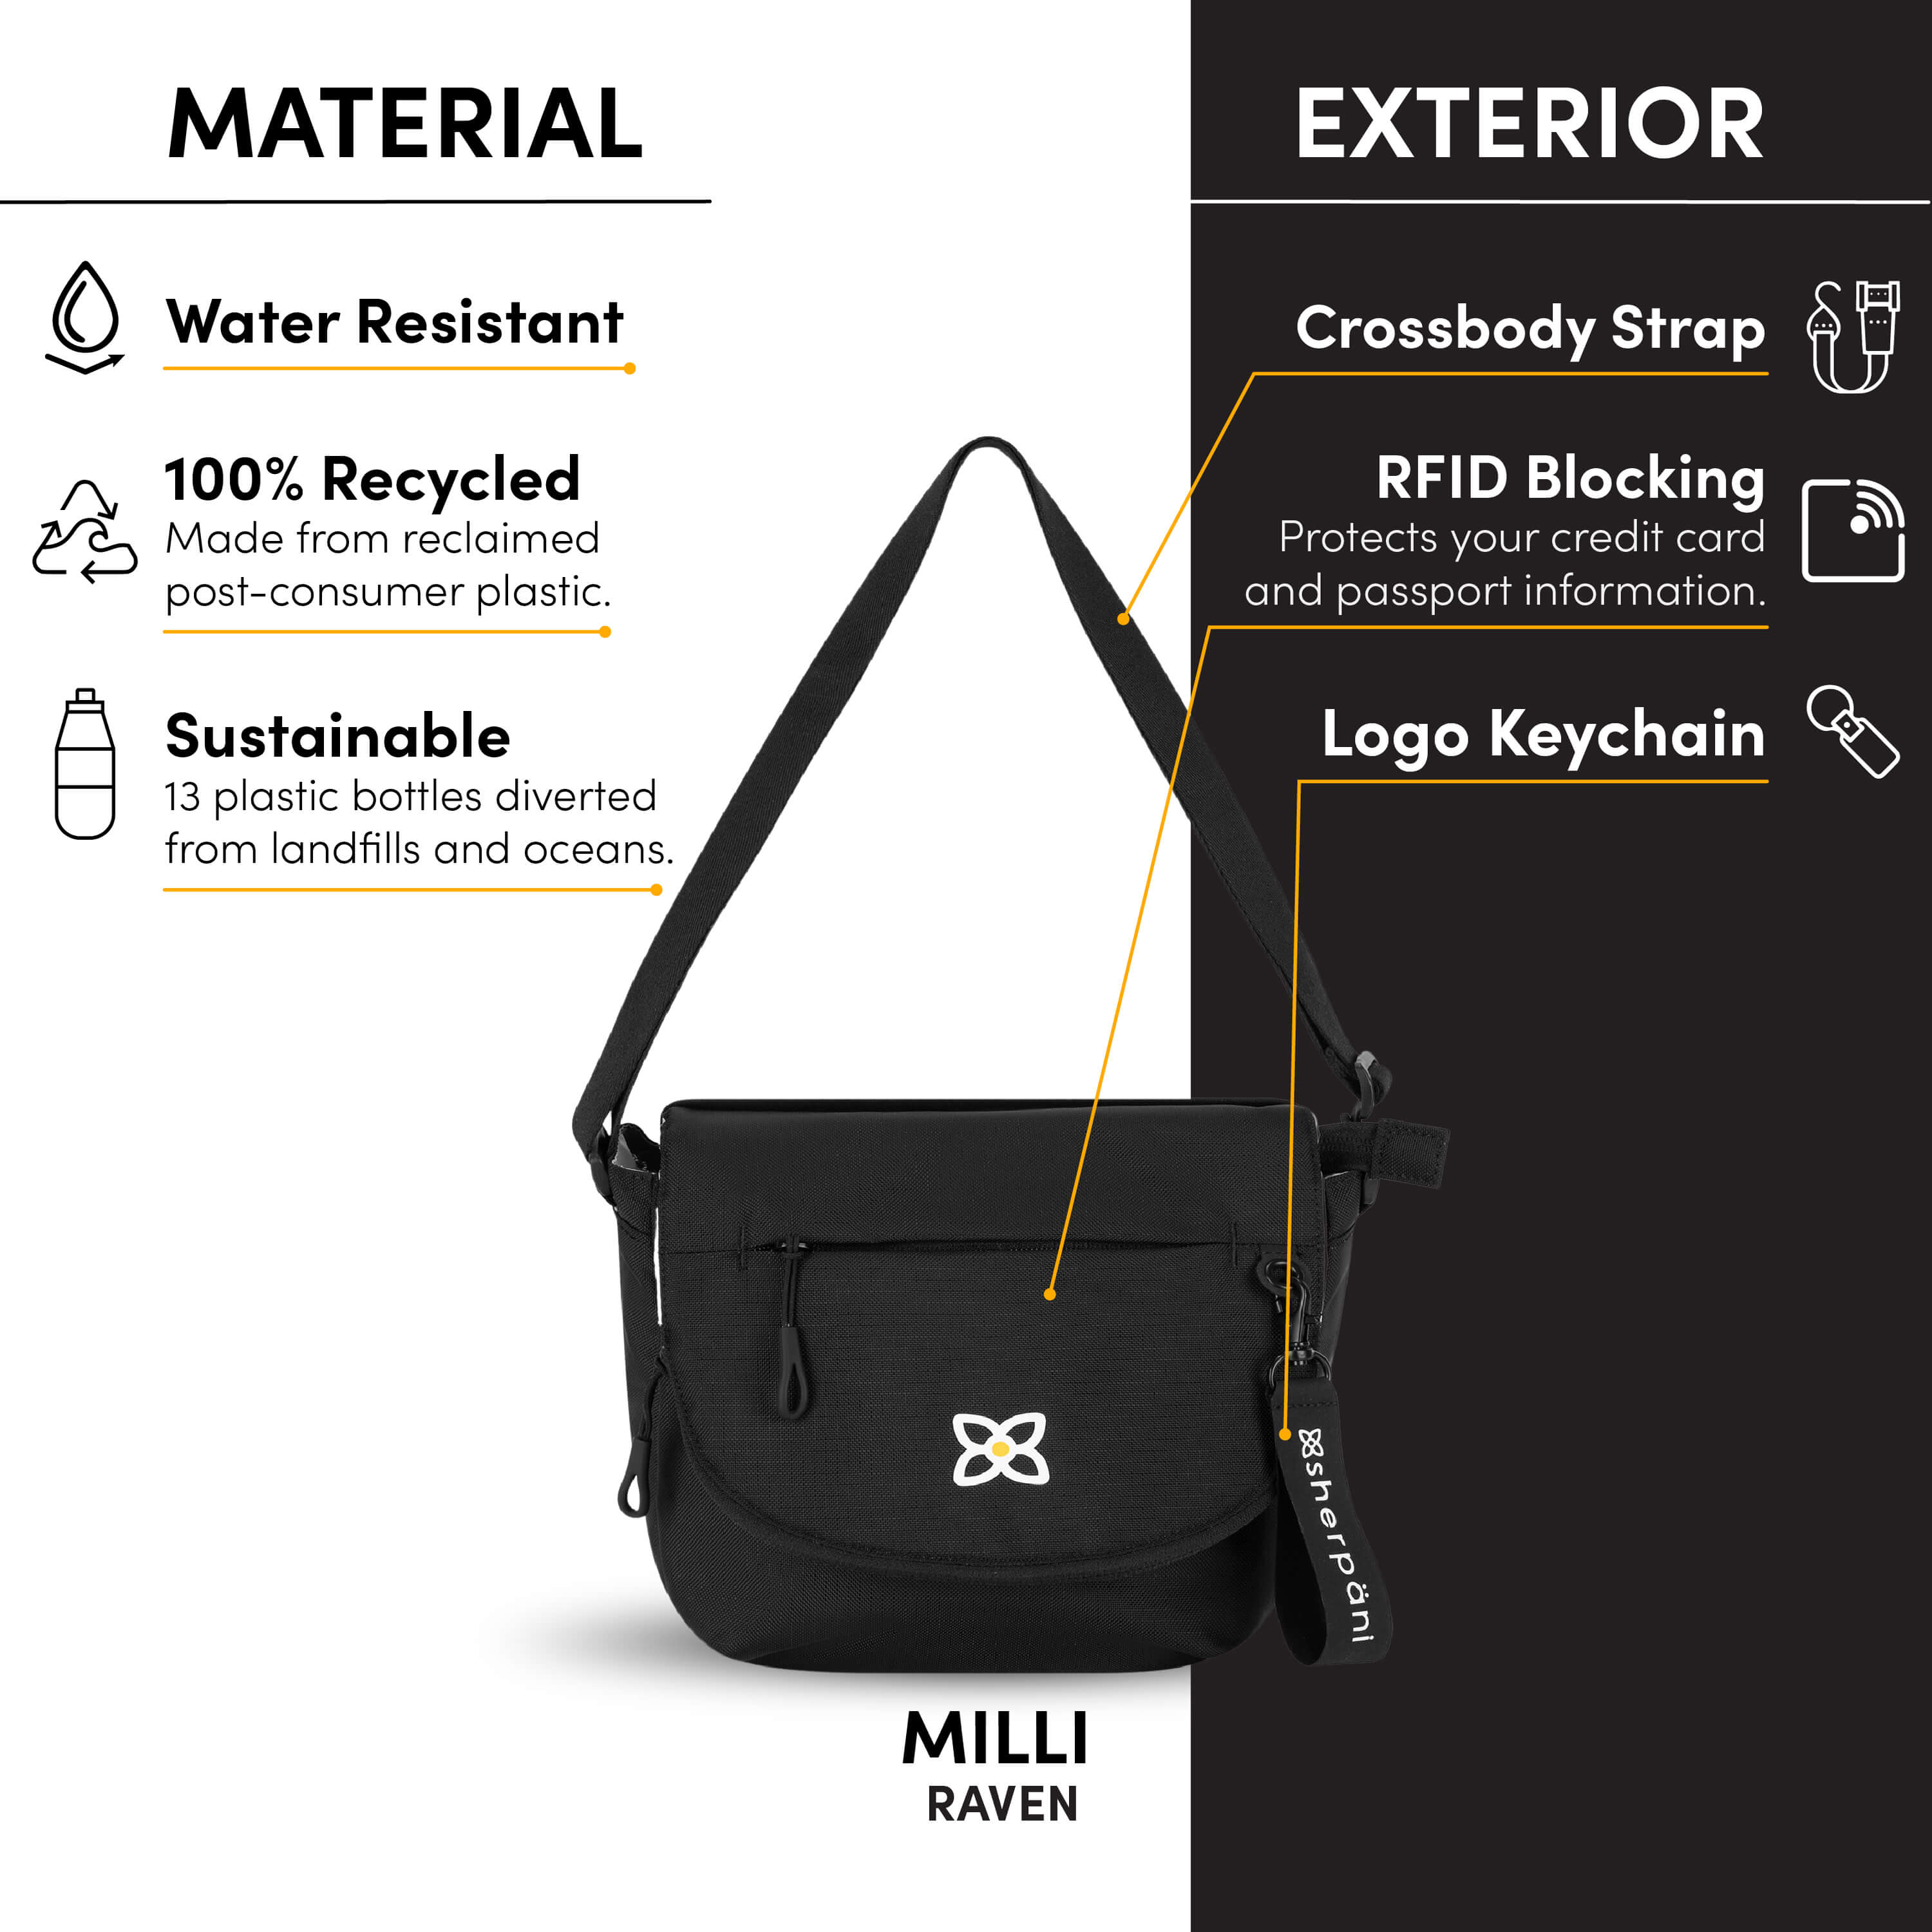 Graphic showcasing the special features of Sherpani classic messenger bag, the Milli. Features include water-resistant material, made from recycled materials, adjustable crossbody strap, RFID protected, Sherpani logo keychain. 